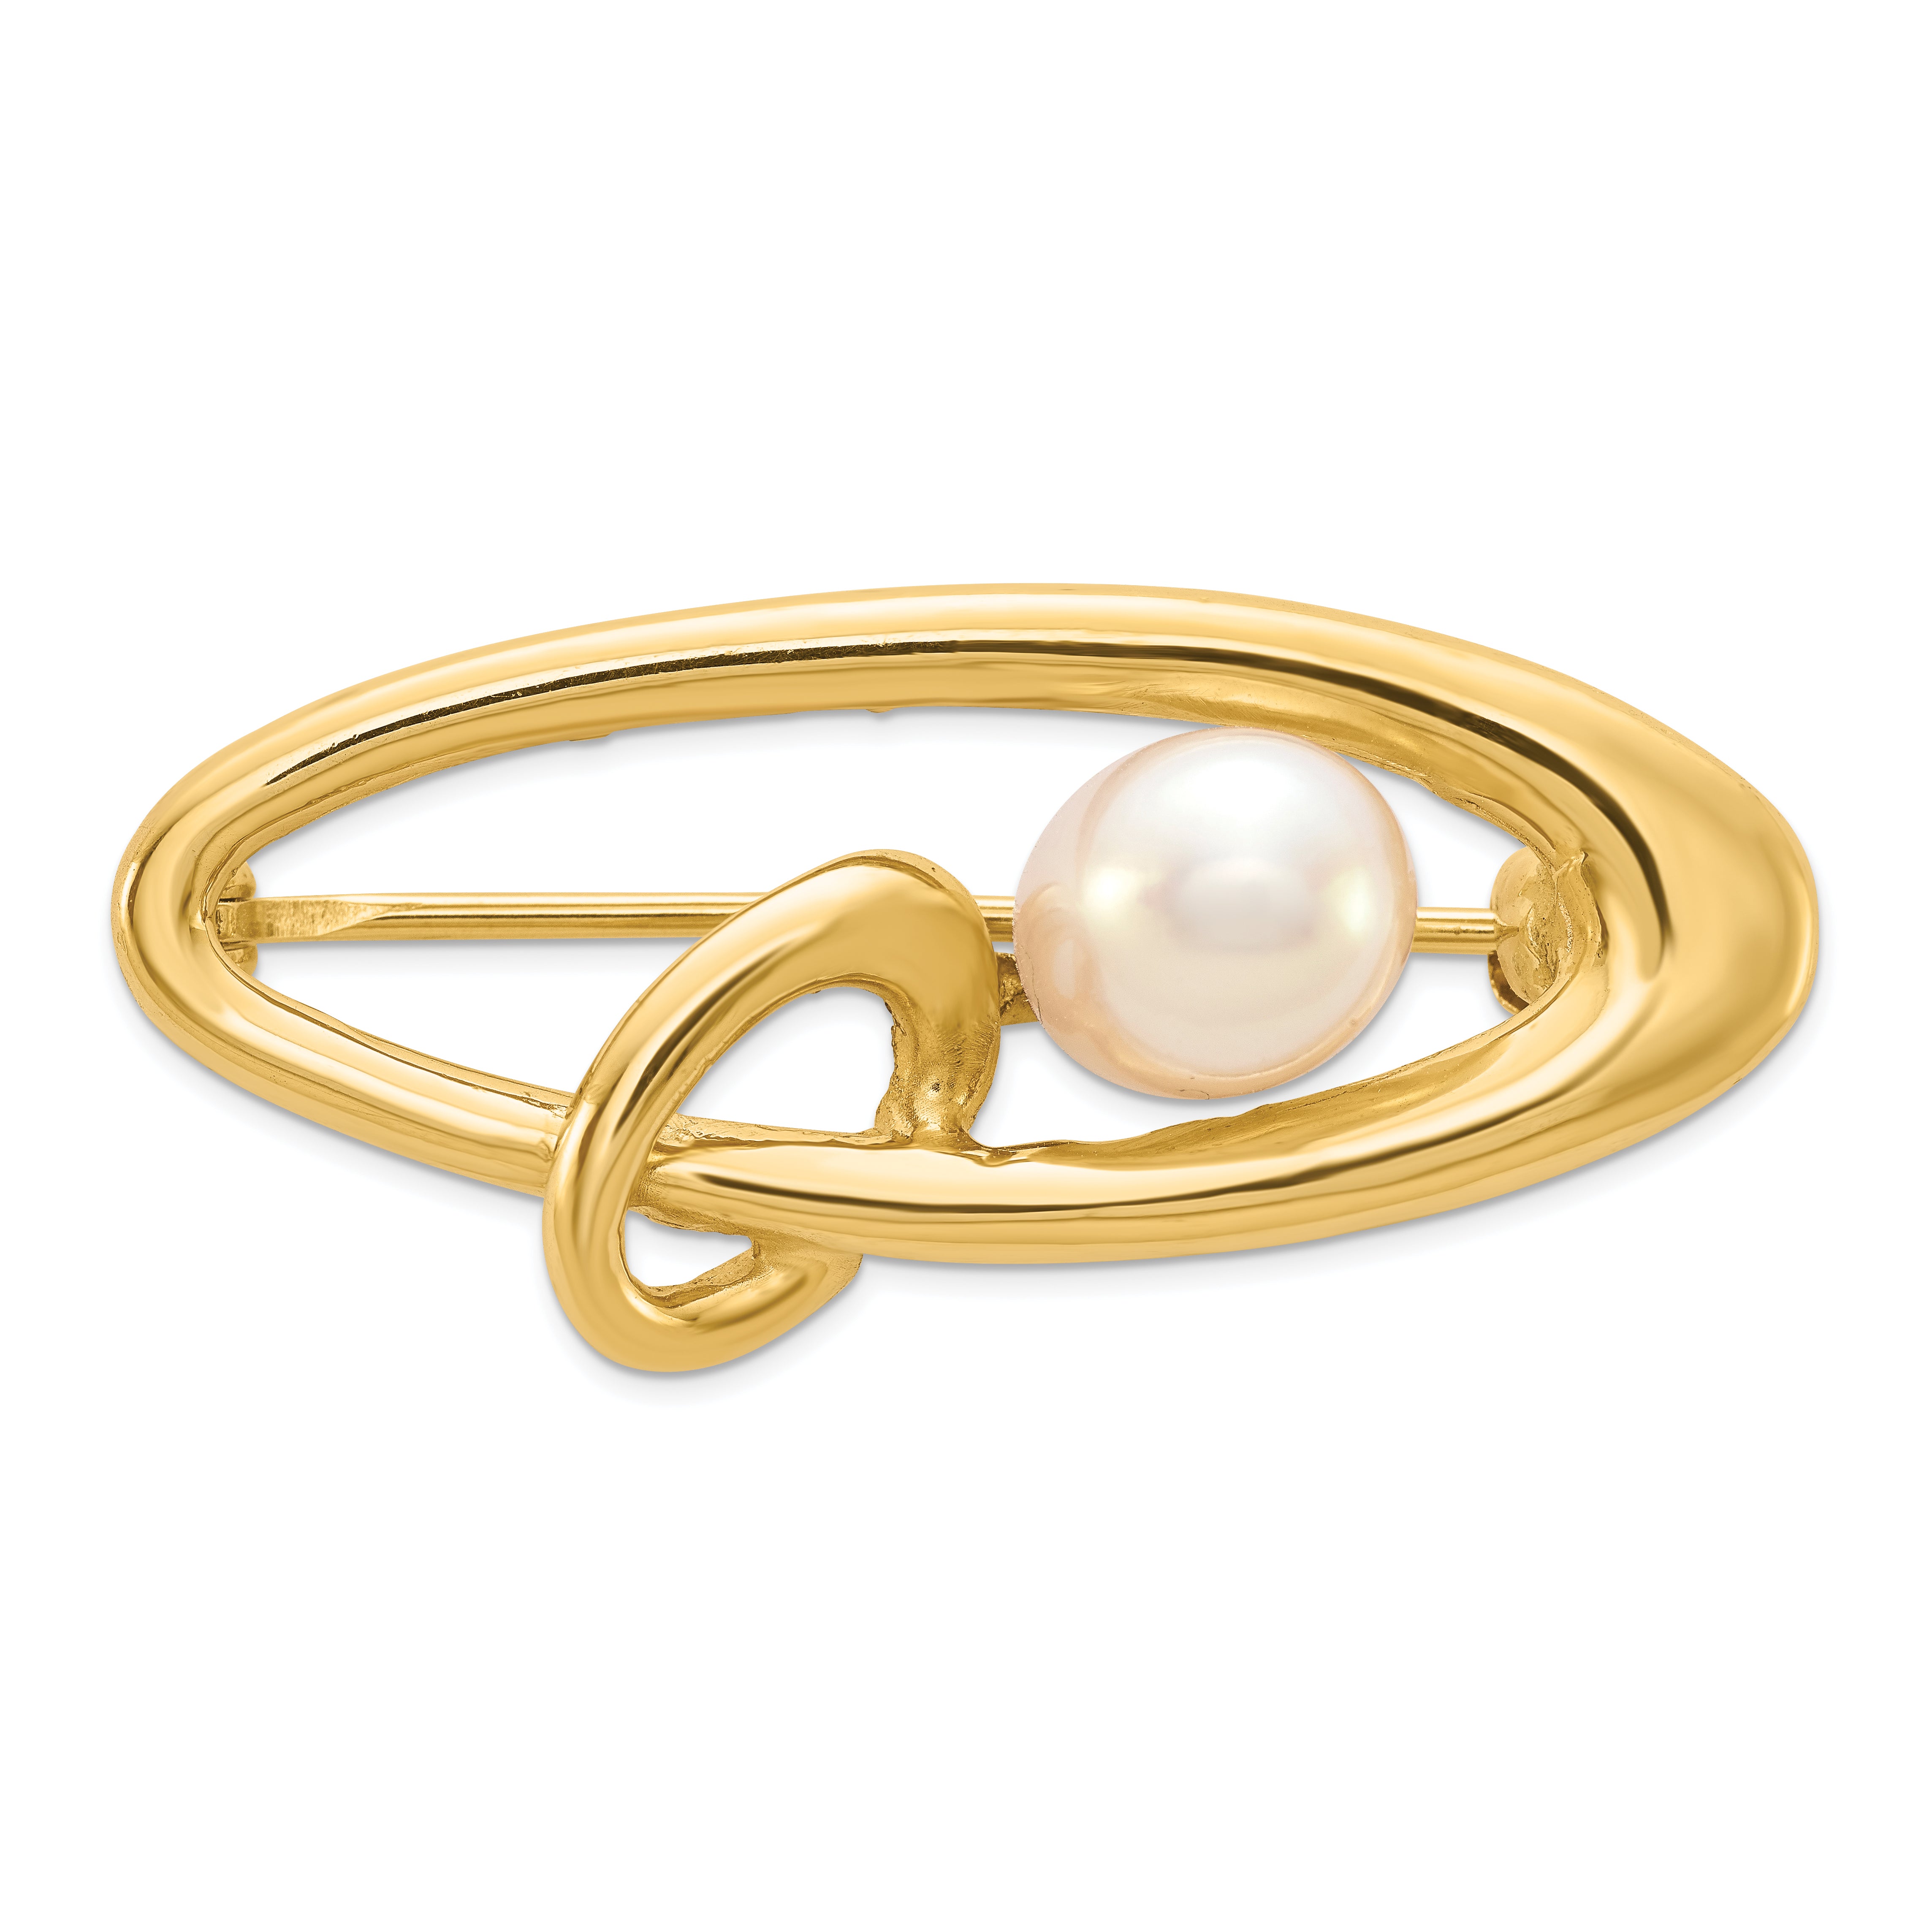 14k Polished Oval with 5-6mm White Rice Freshwater Cultured Pearl Pin Brooch